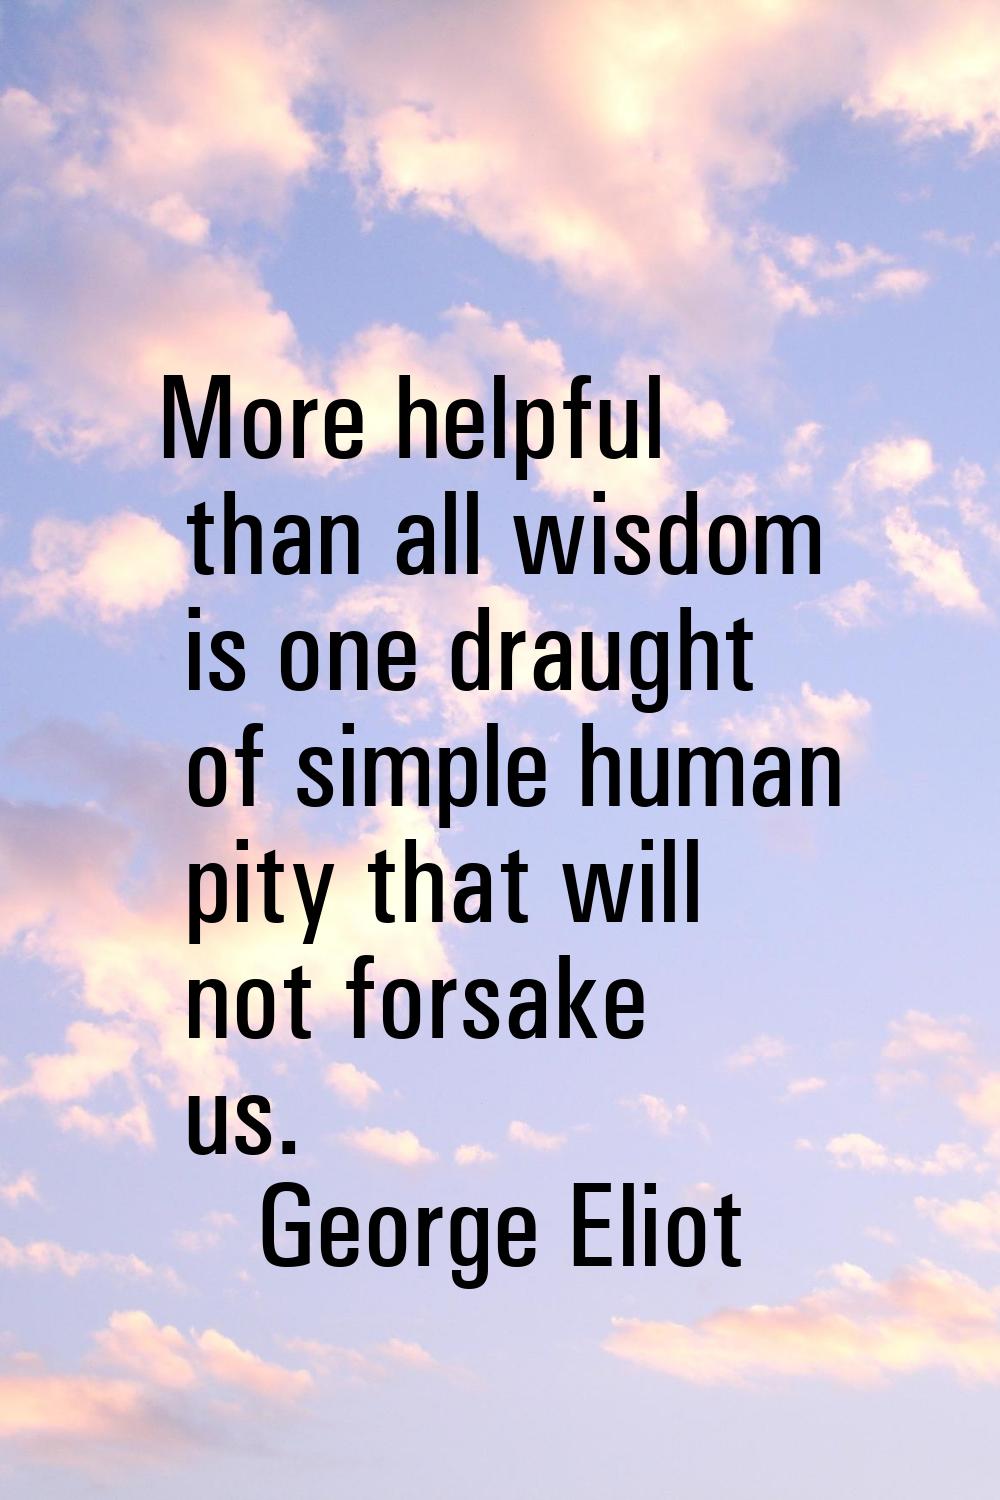 More helpful than all wisdom is one draught of simple human pity that will not forsake us.